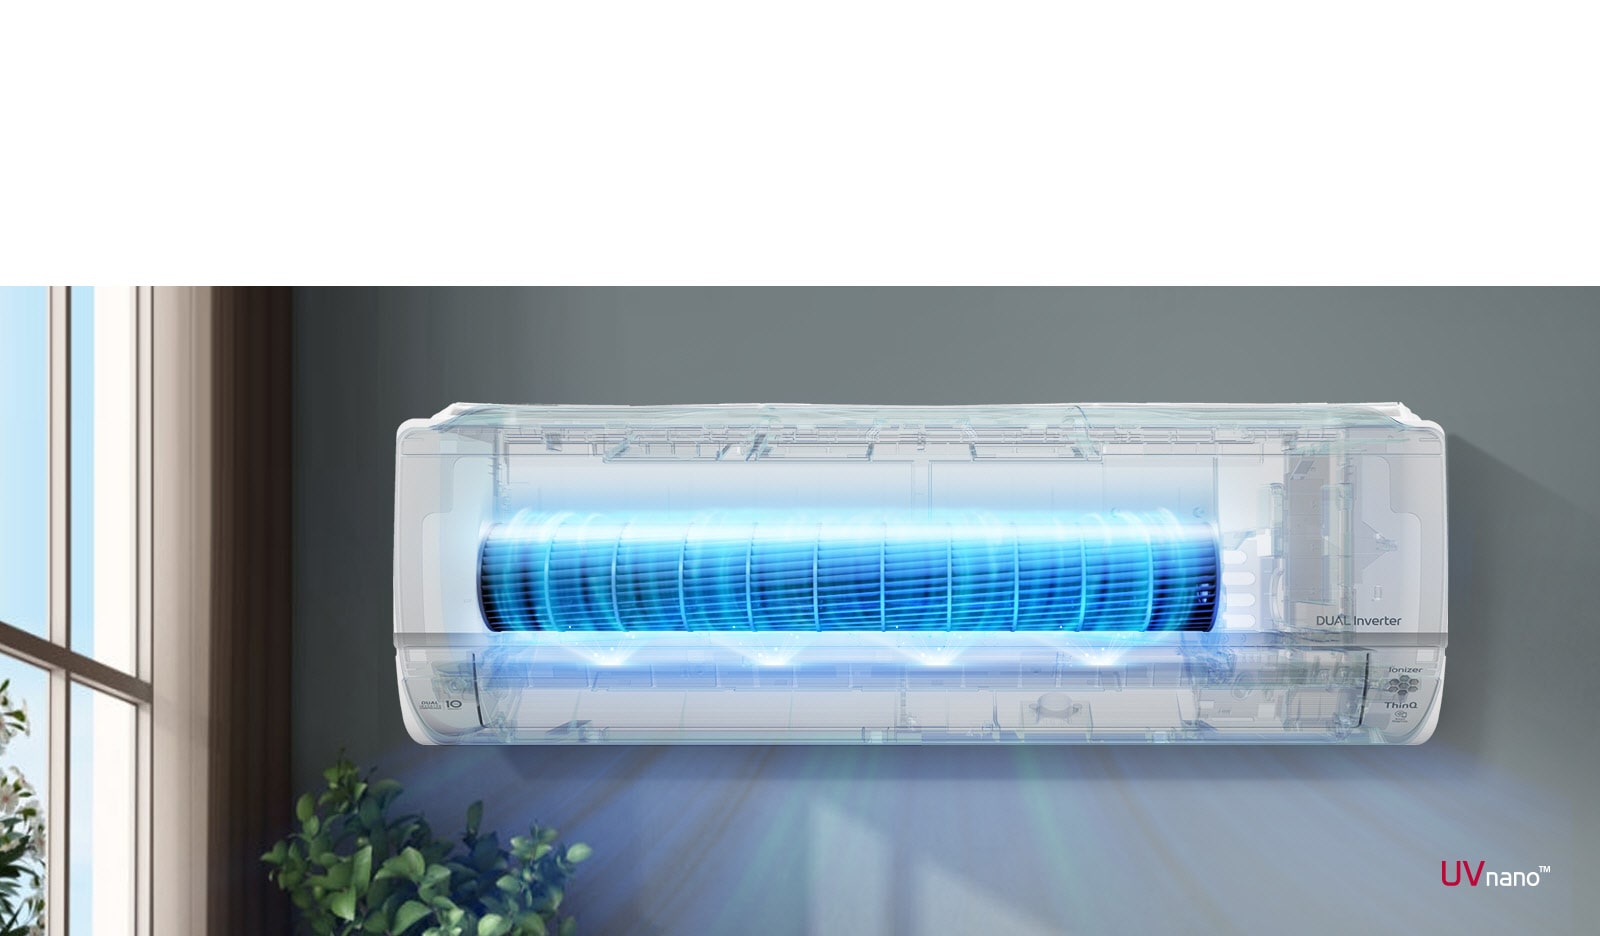 A video shows the front view of the air conditioner installed on a wall. The front of the machine is see through and it turns on to show the inner workings. The fans are highlighted blue to show the UV LED light that removes bacteria. Air blows out of the machine. The UVnano logo is in the bottom right corner.